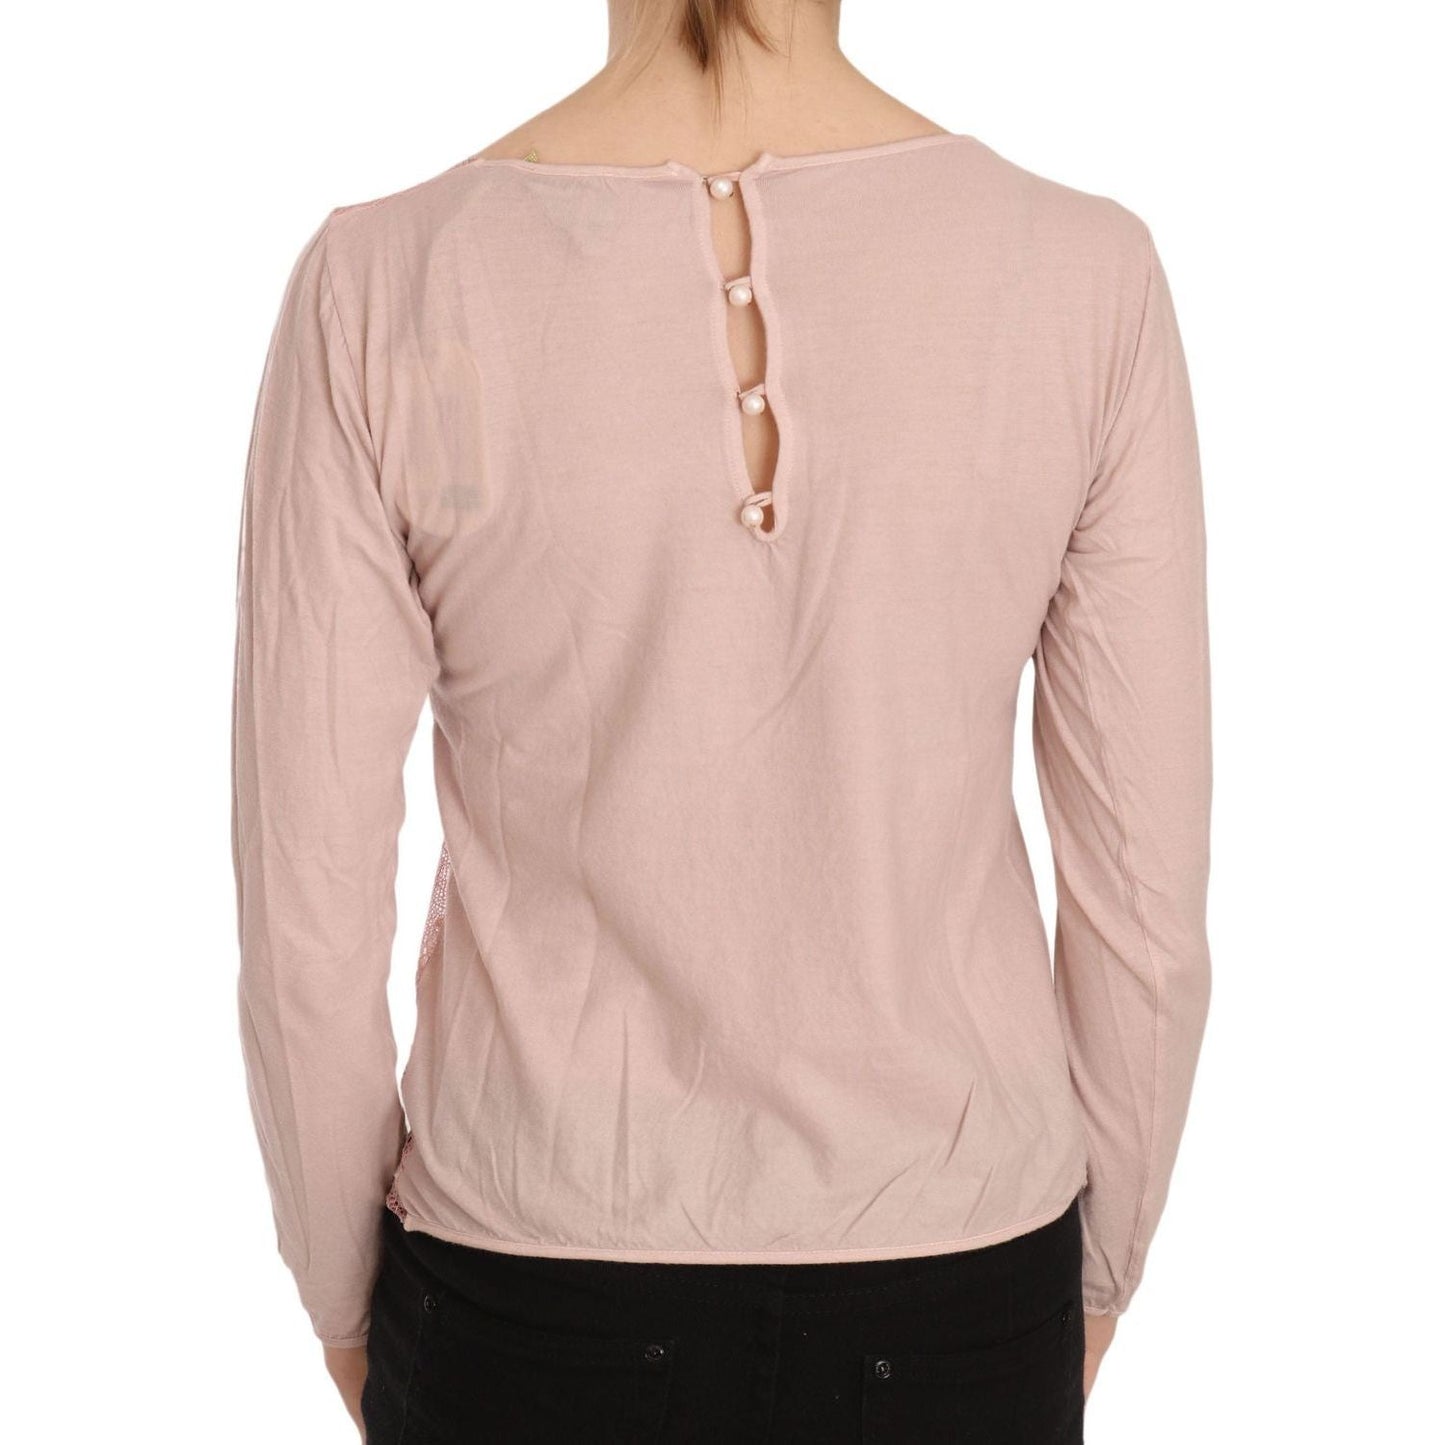 PINK MEMORIES Chic Pink See-Through Cotton Blouse pink-lace-see-through-long-sleeve-top-blouse-1